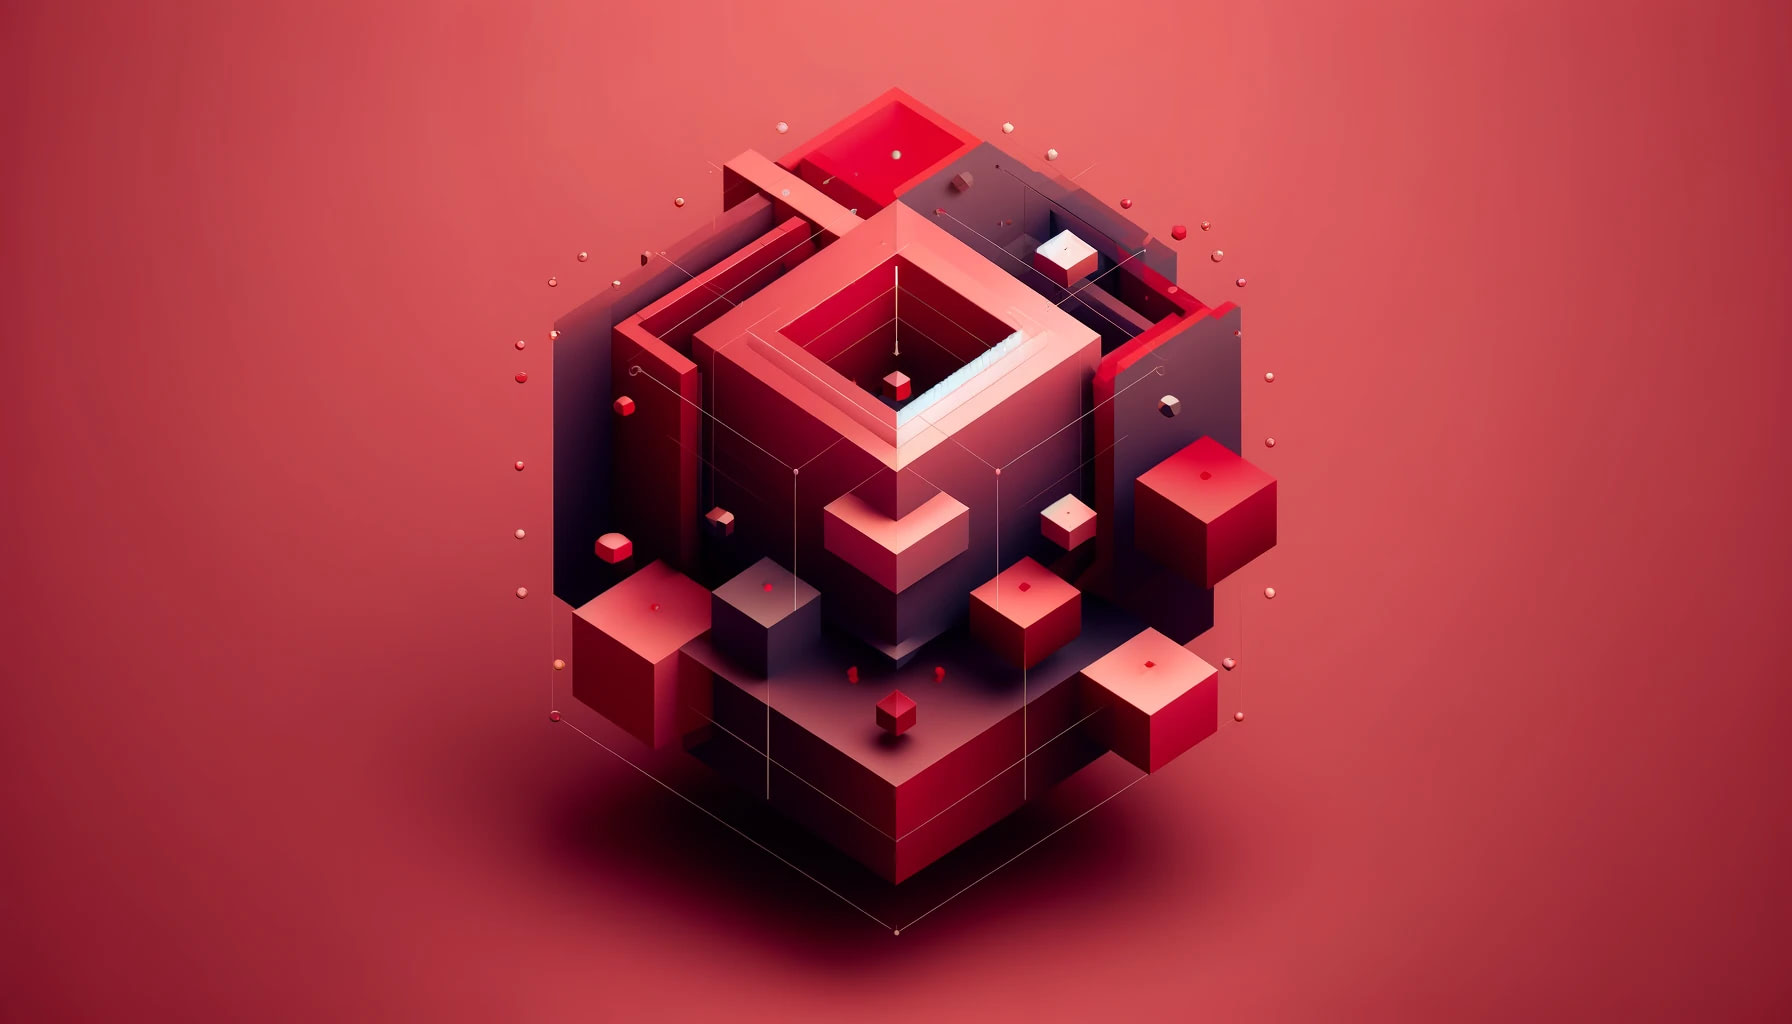 Abstract, minimalistic 3D-like image in duotone Ruby red, depicting hidden gems through obscured and nested geometrical shapes.